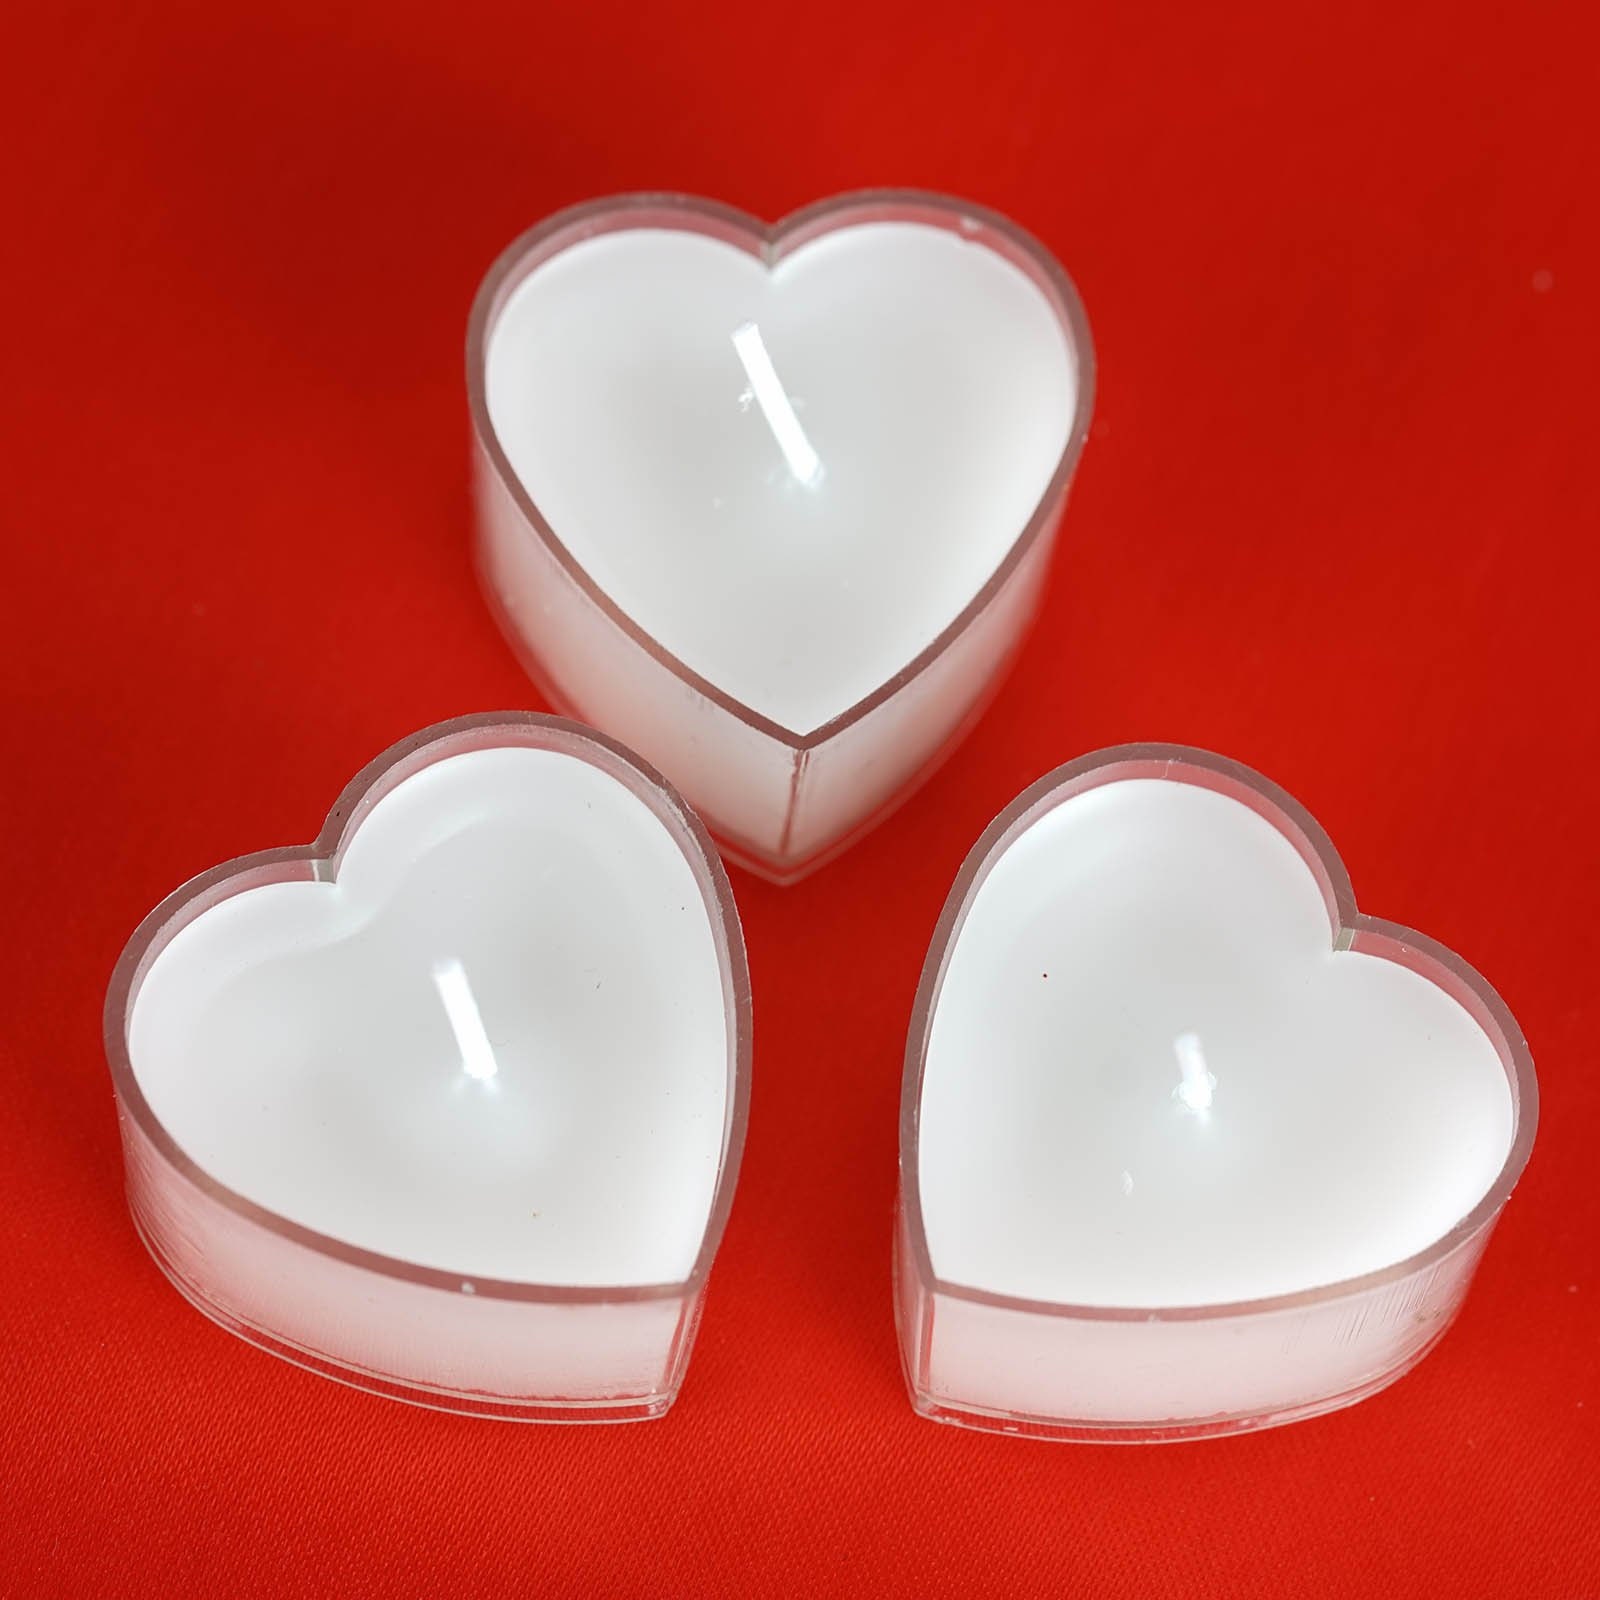 12 Pack White Heart Candles, Heart Shaped Tealight Candles, Dinner Candles  Decor for Holiday, Wedding, Party Decor -  Norway